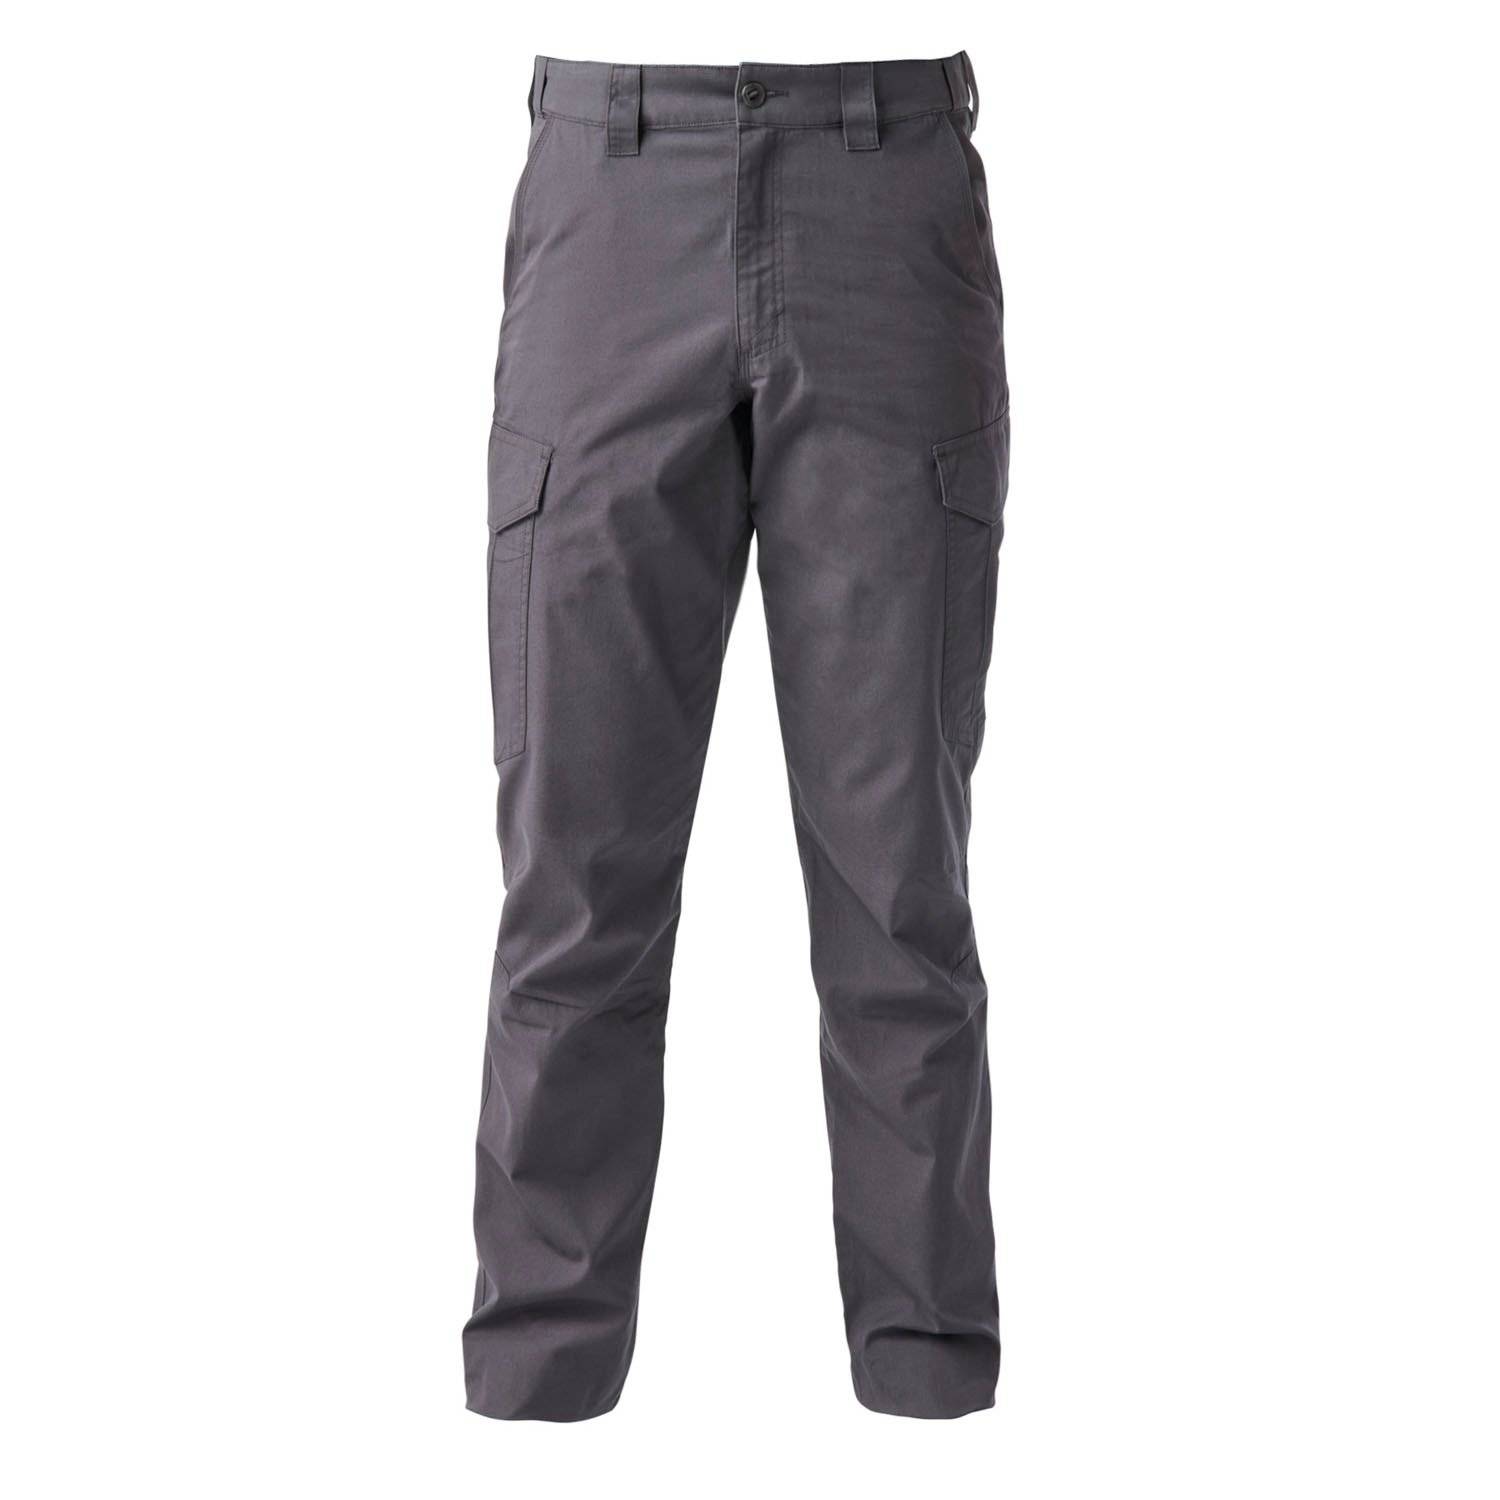 Buy > tactical cargo pants clearance > in stock